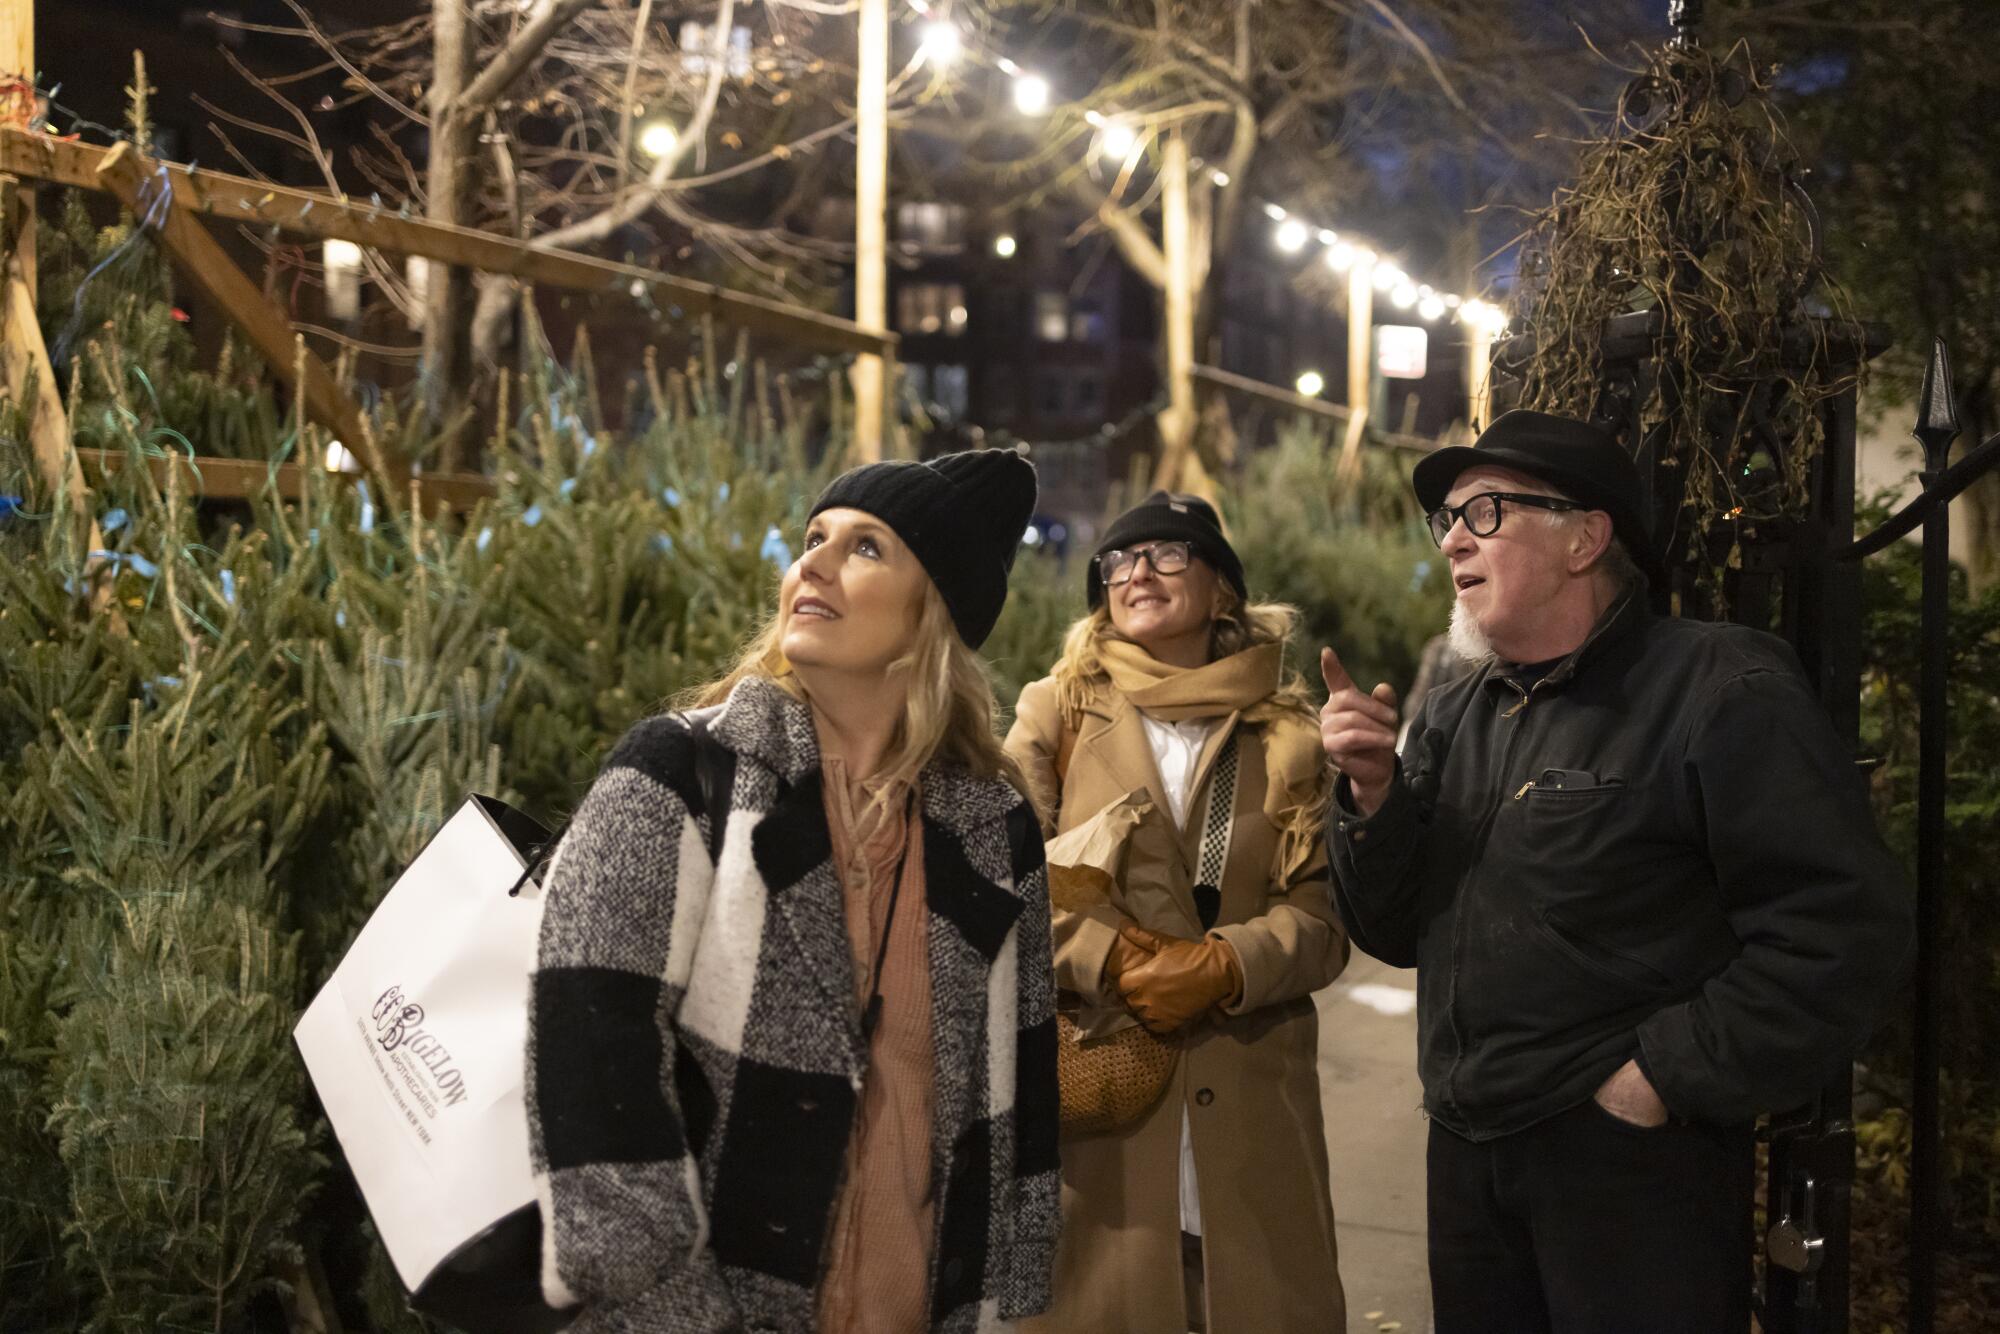 A man points while speaking to two women at a Christmas tree lot.